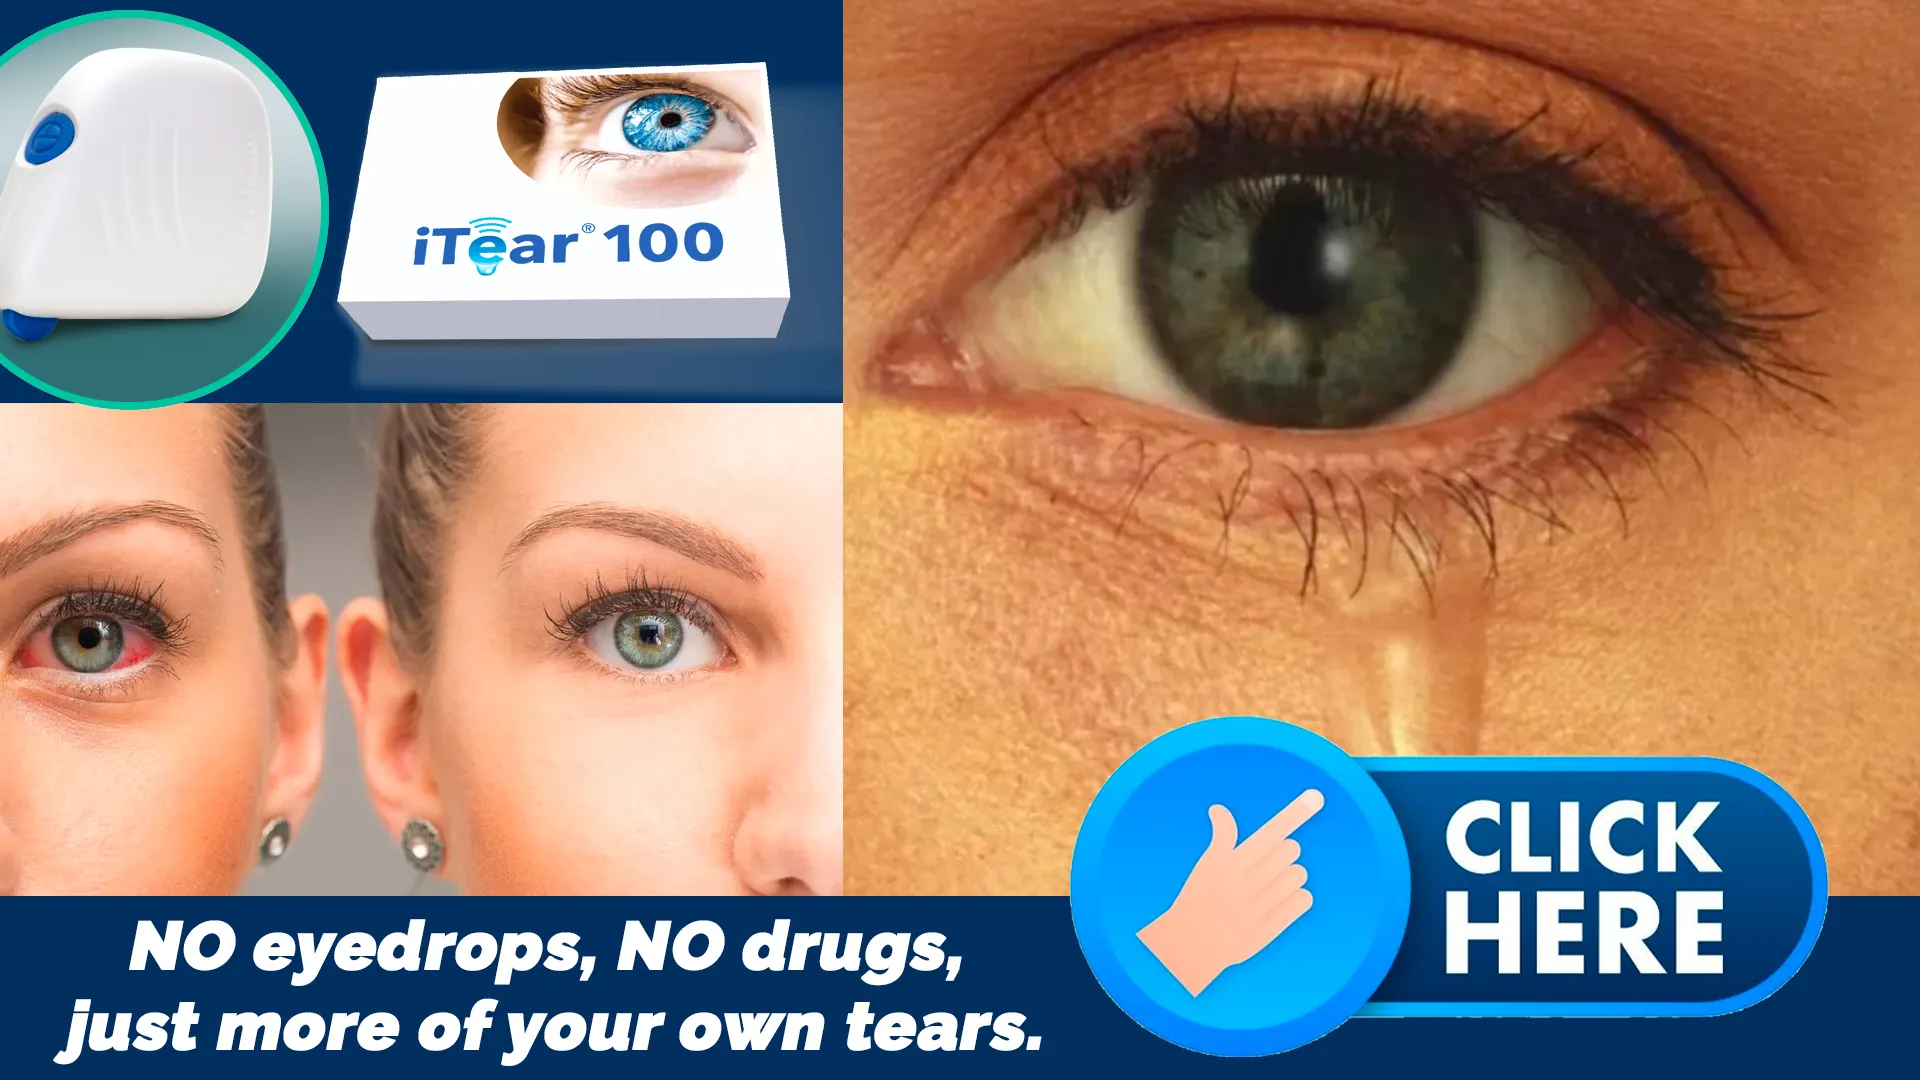 A Drug-Free Solution: The iTEAR100 Device